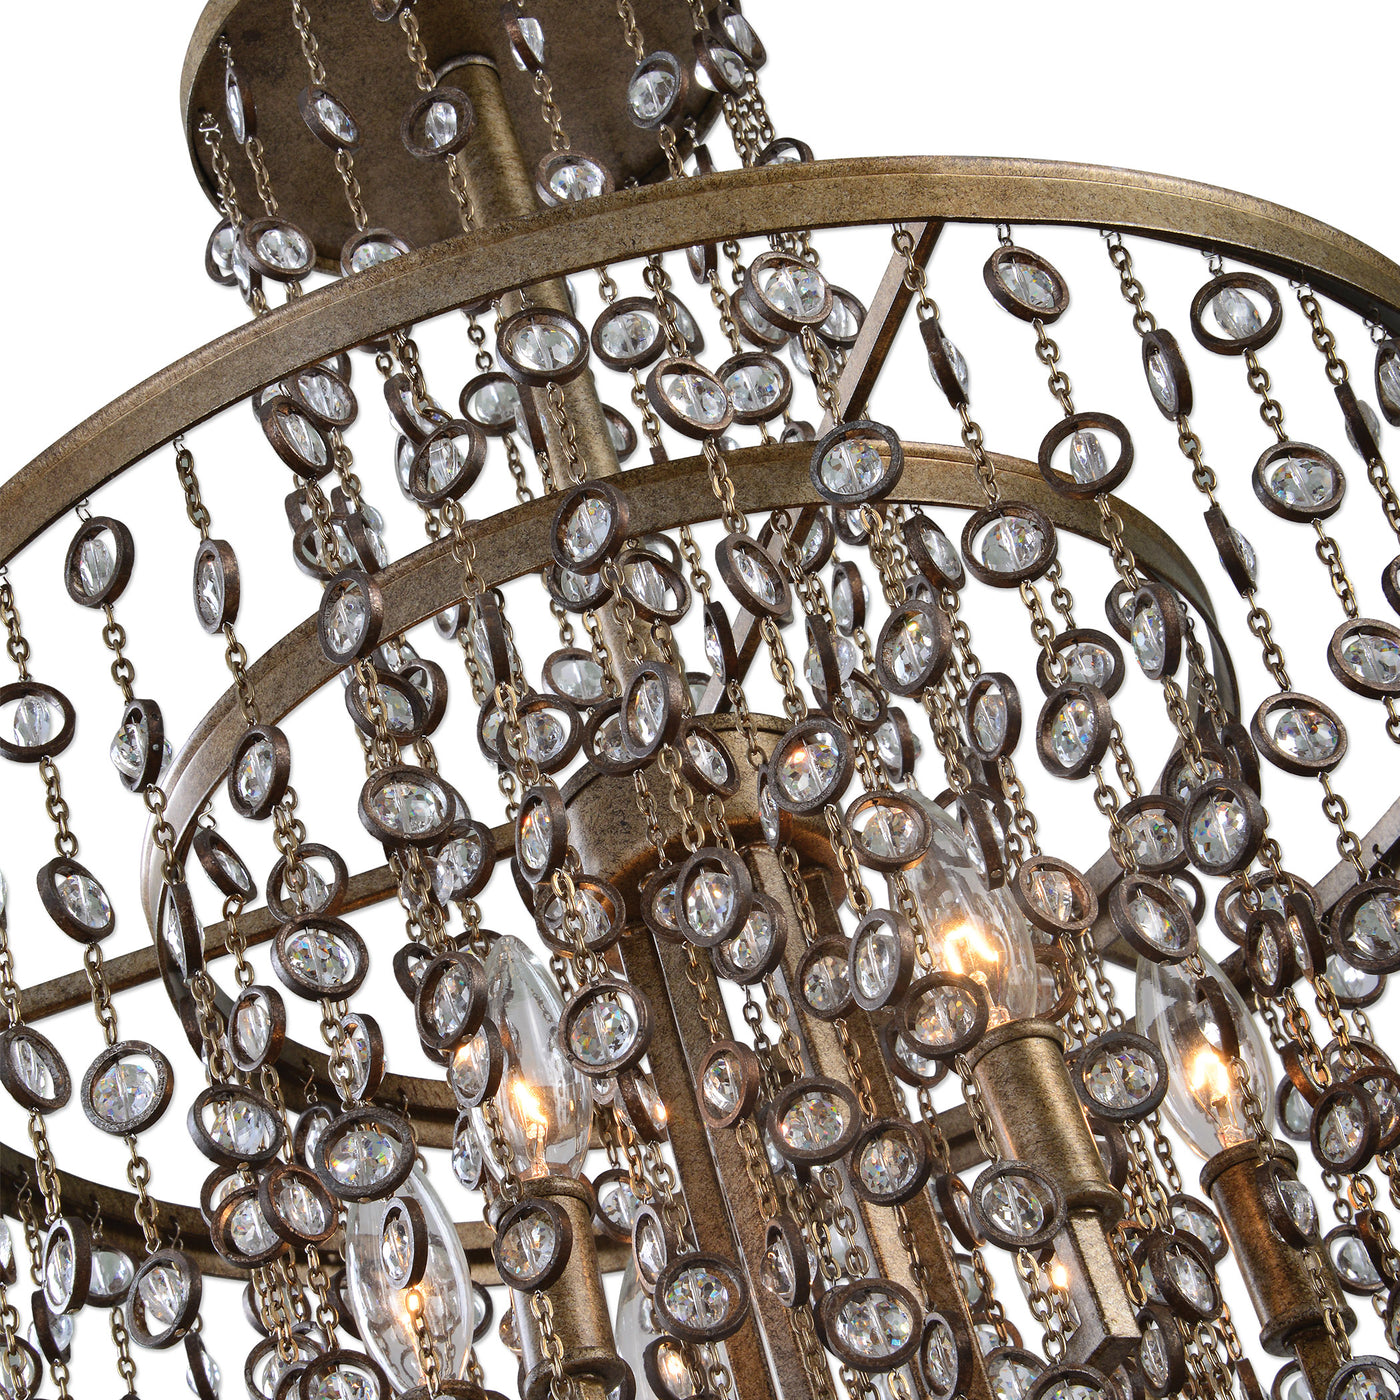 Refined 6 Lt. Tiered Chandelier In A Silver Swedish Iron Finish, Which Is A Silver Undercoat Then A Heavy Dark Bronze Anti...